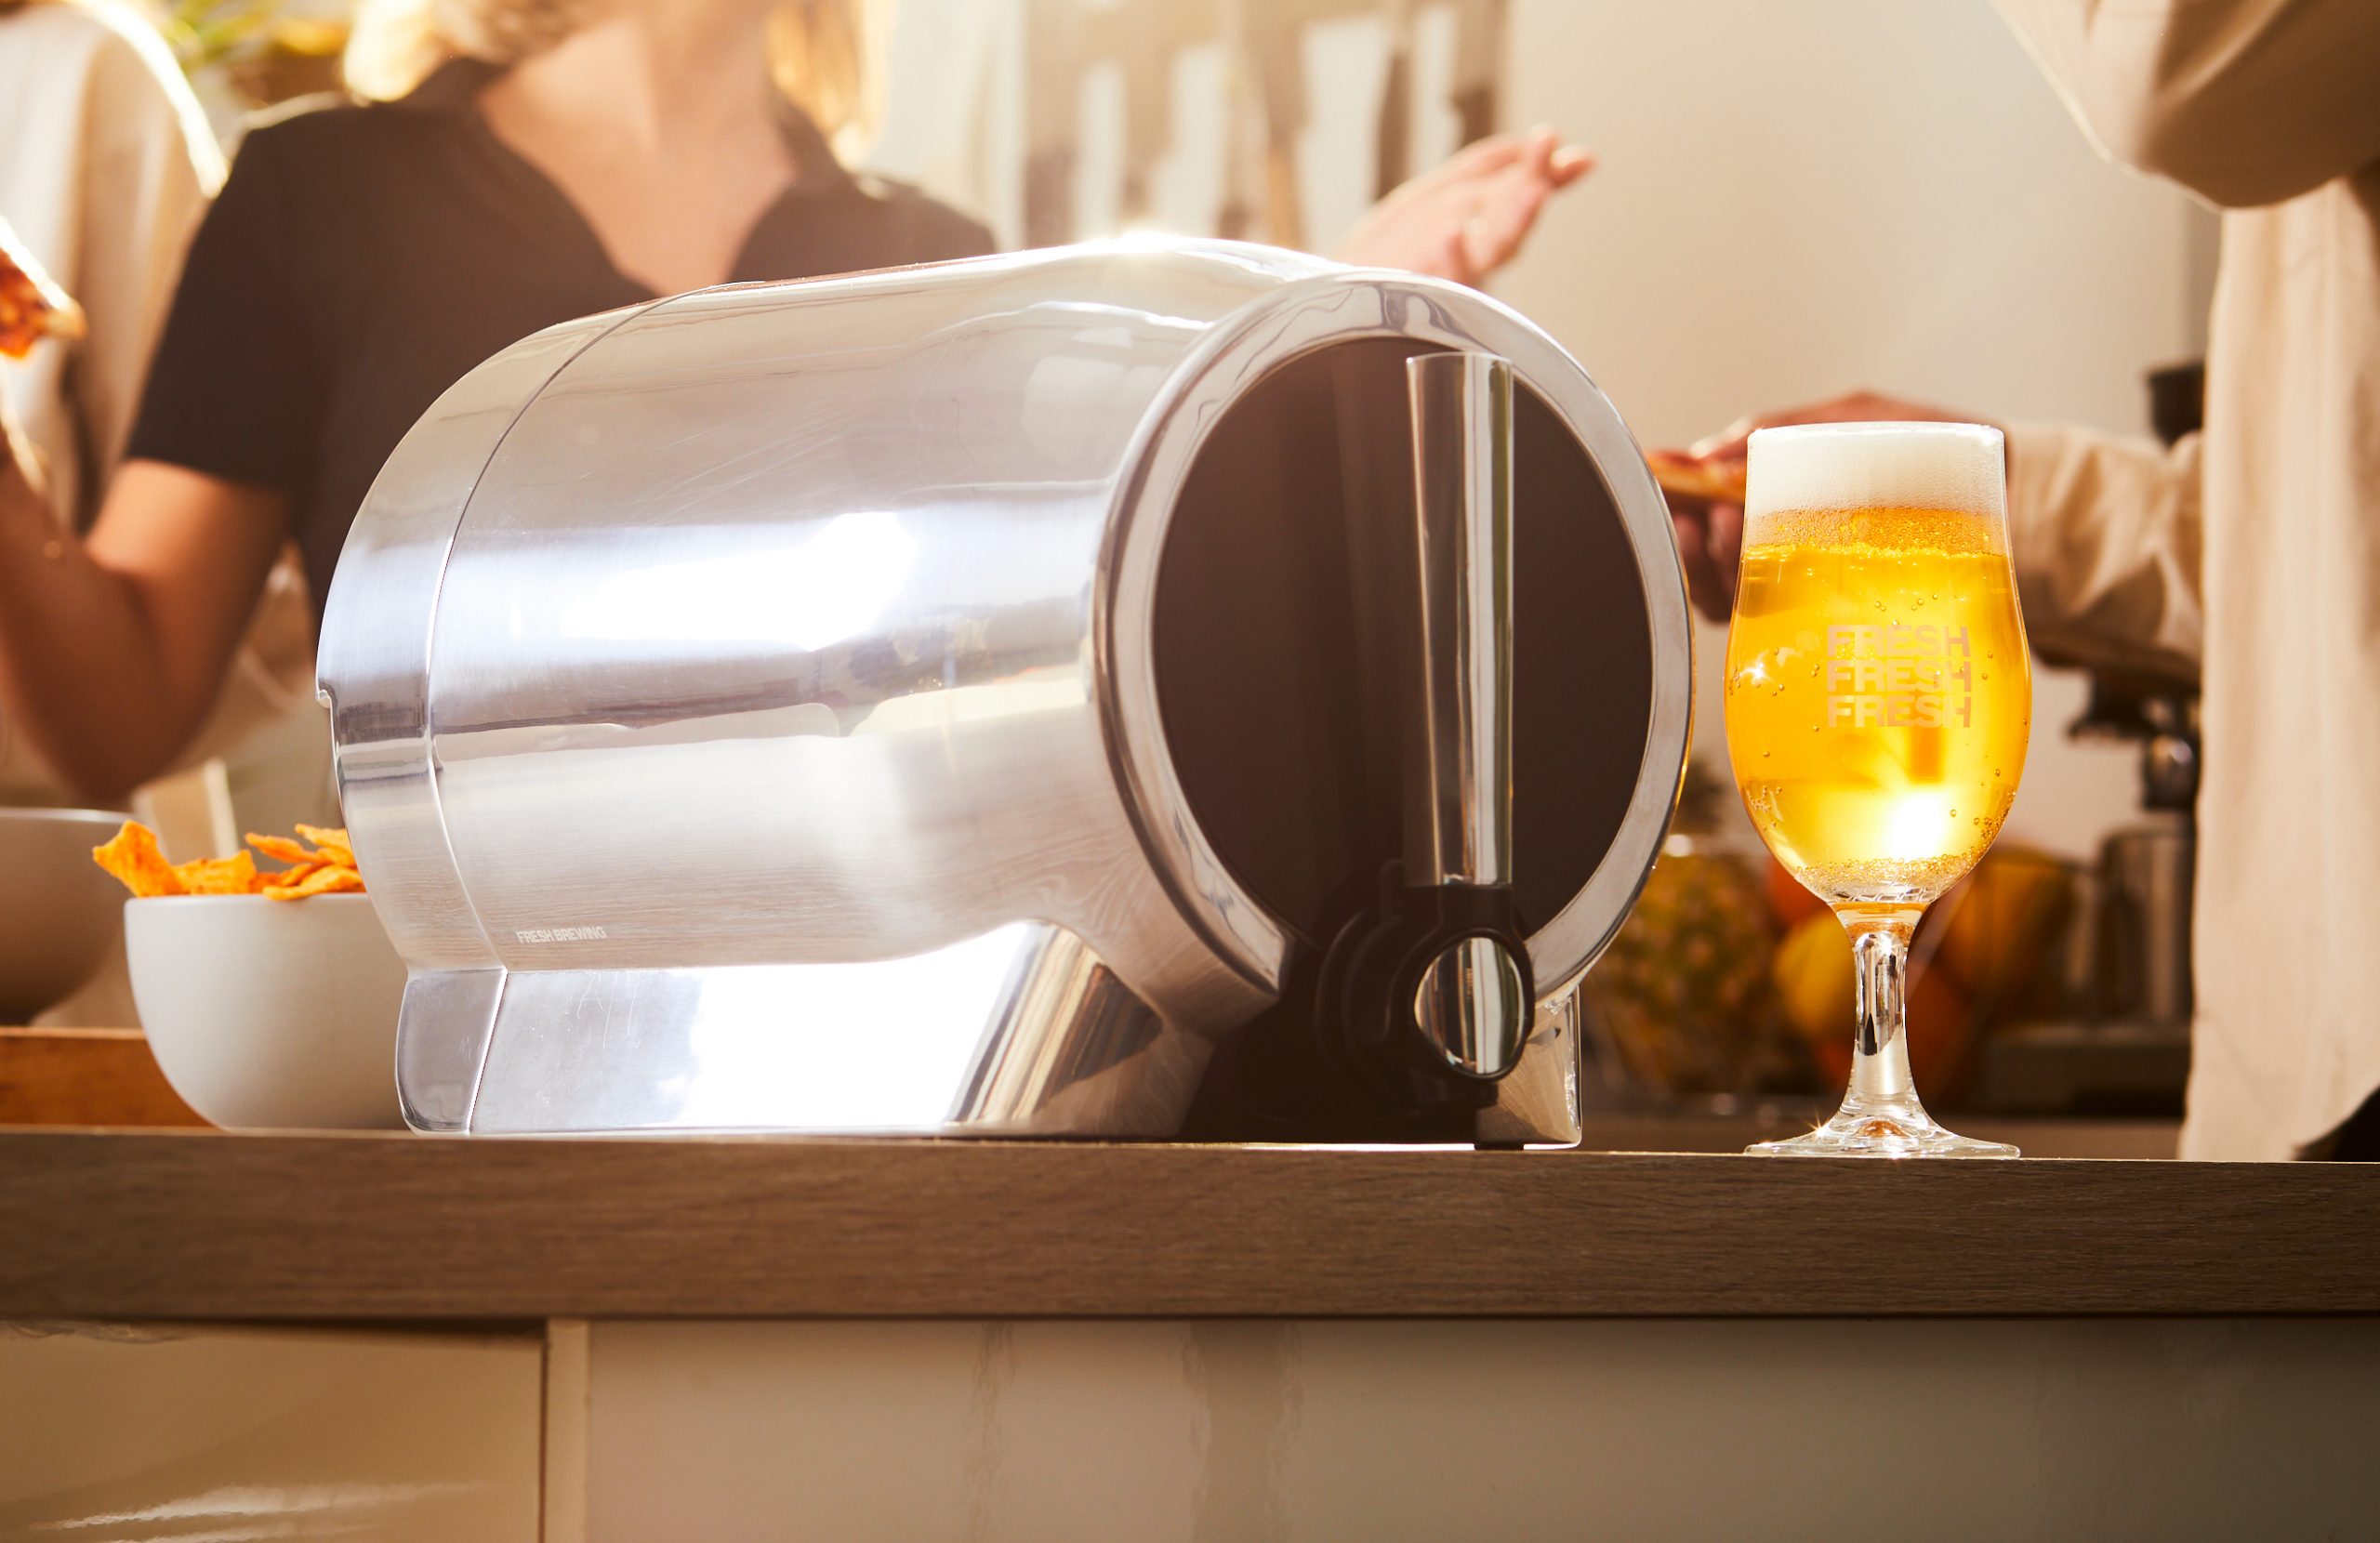 At-home brewery gadget, The Pinter 2, showcased on a bar next to a glass of beer